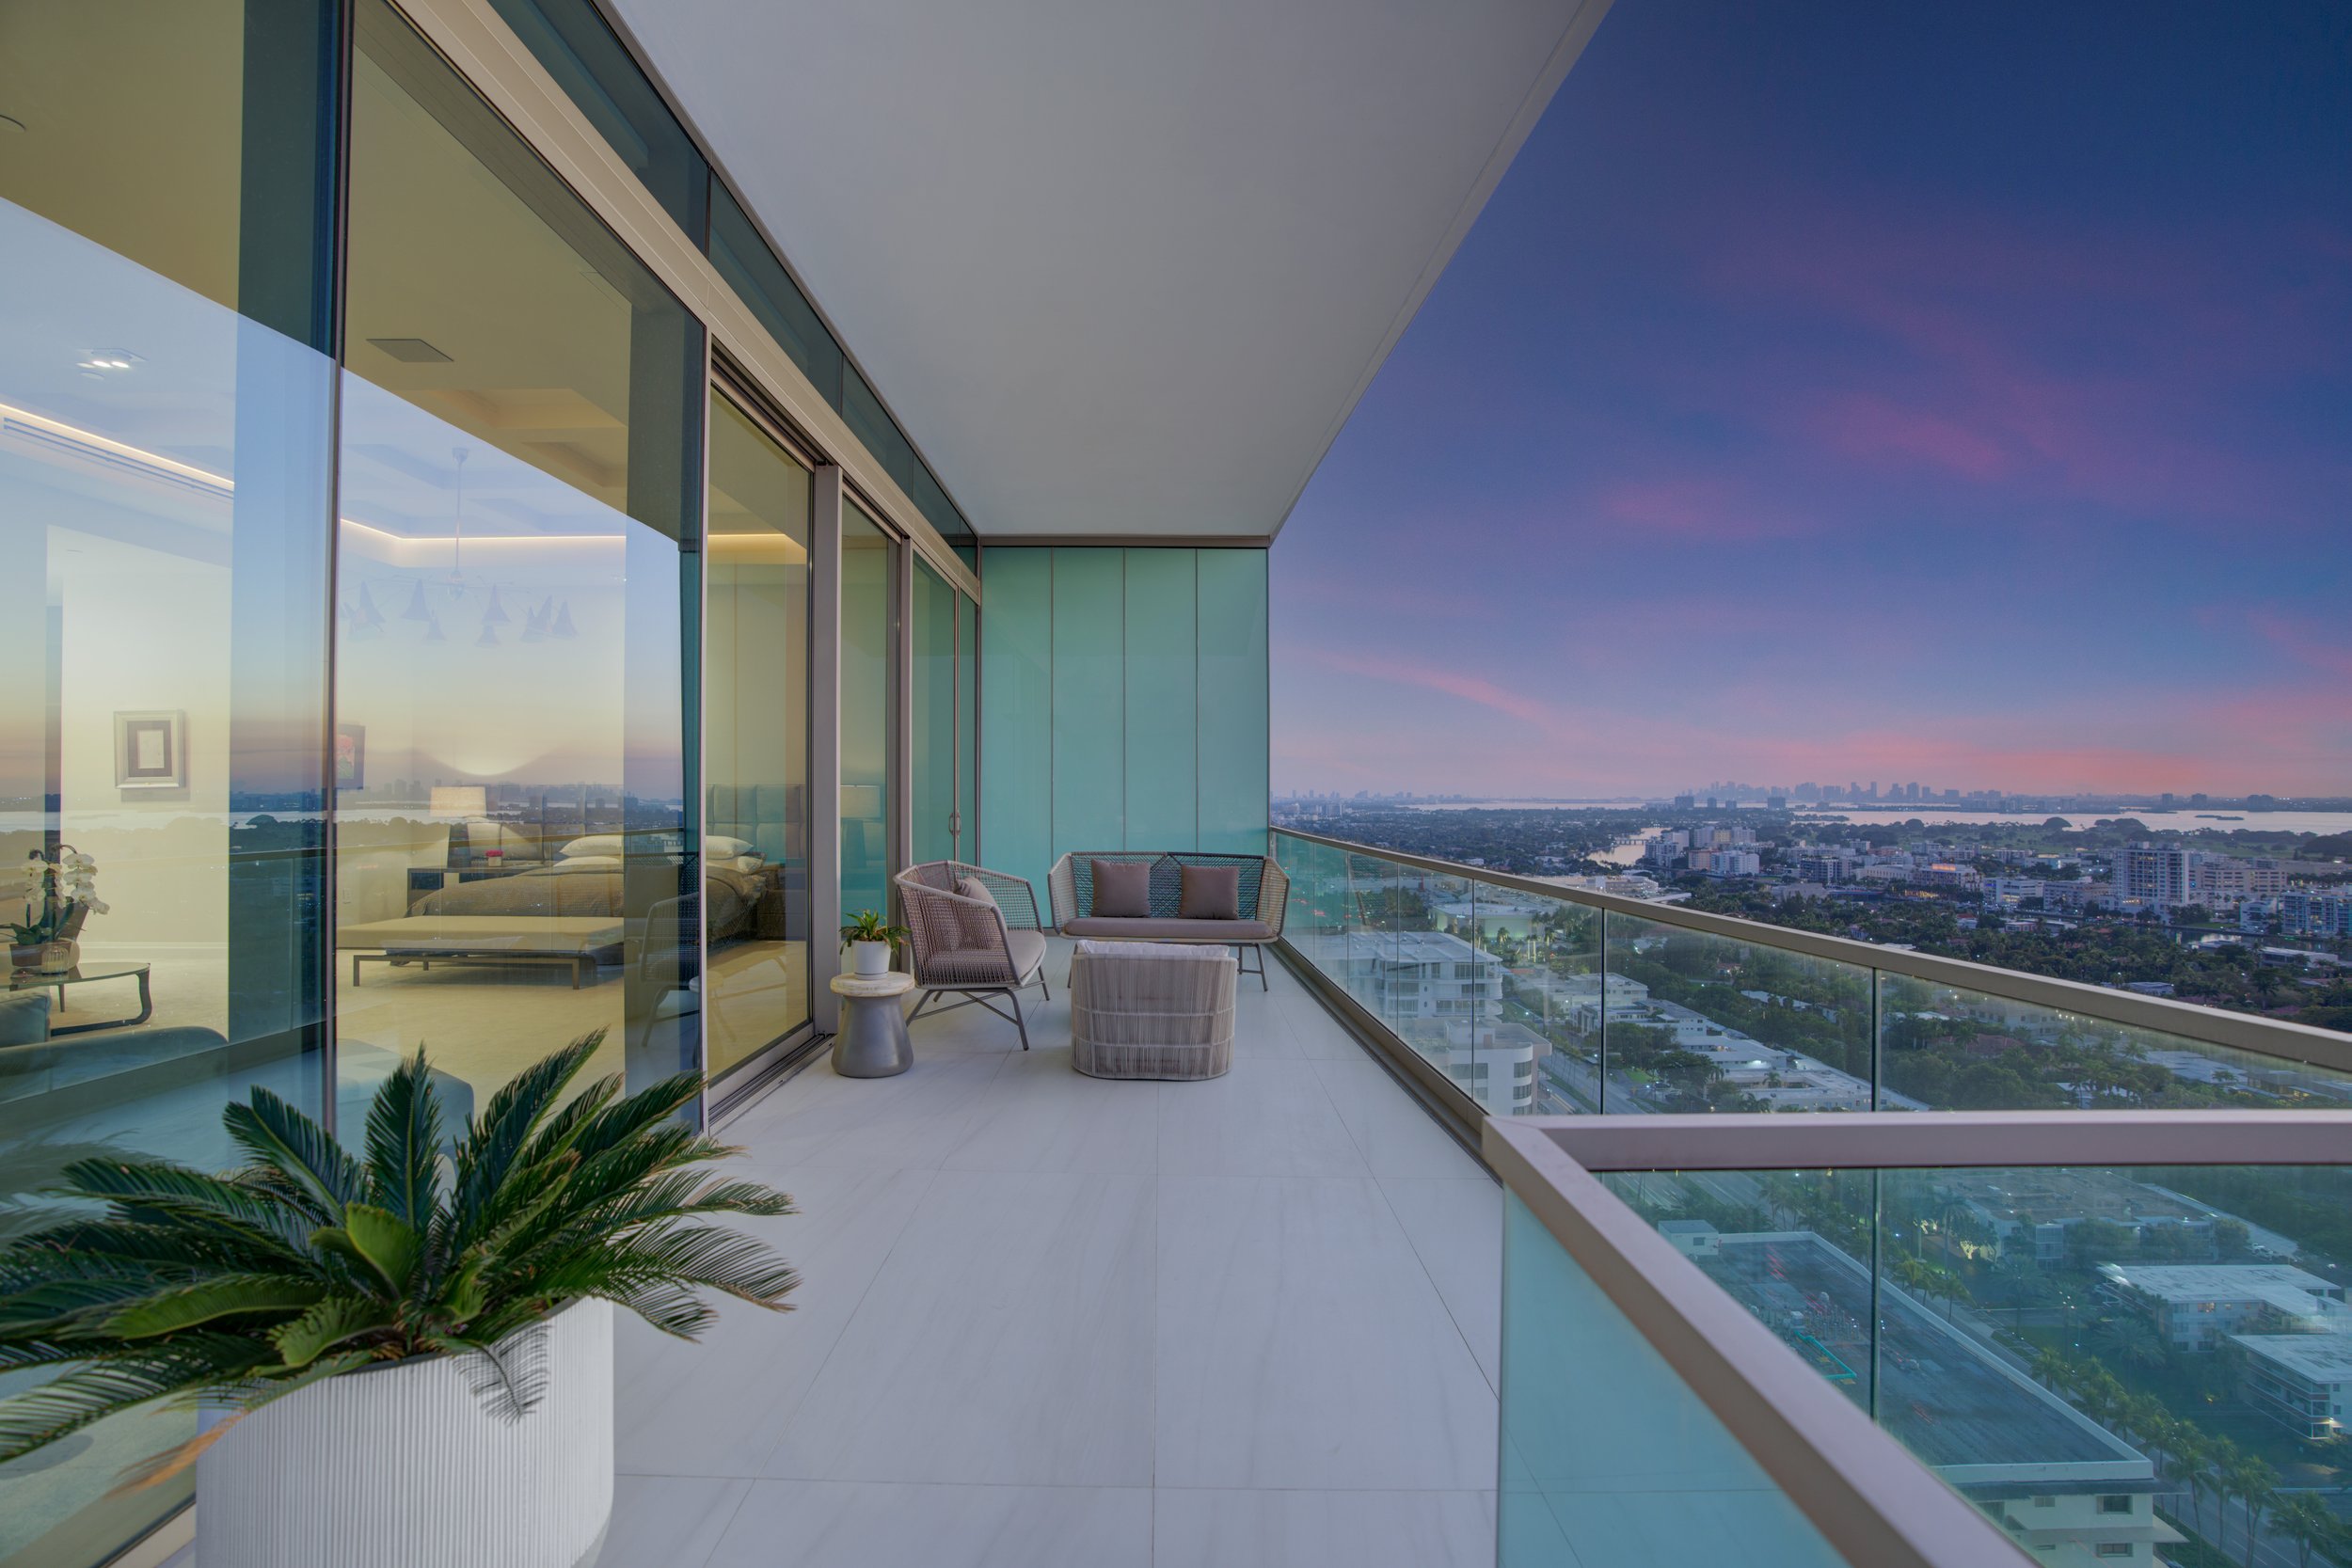 Step Inside This Two-Story Crown Jewel Penthouse At Oceana Bal Harbour Asking $25 Million 22.jpg